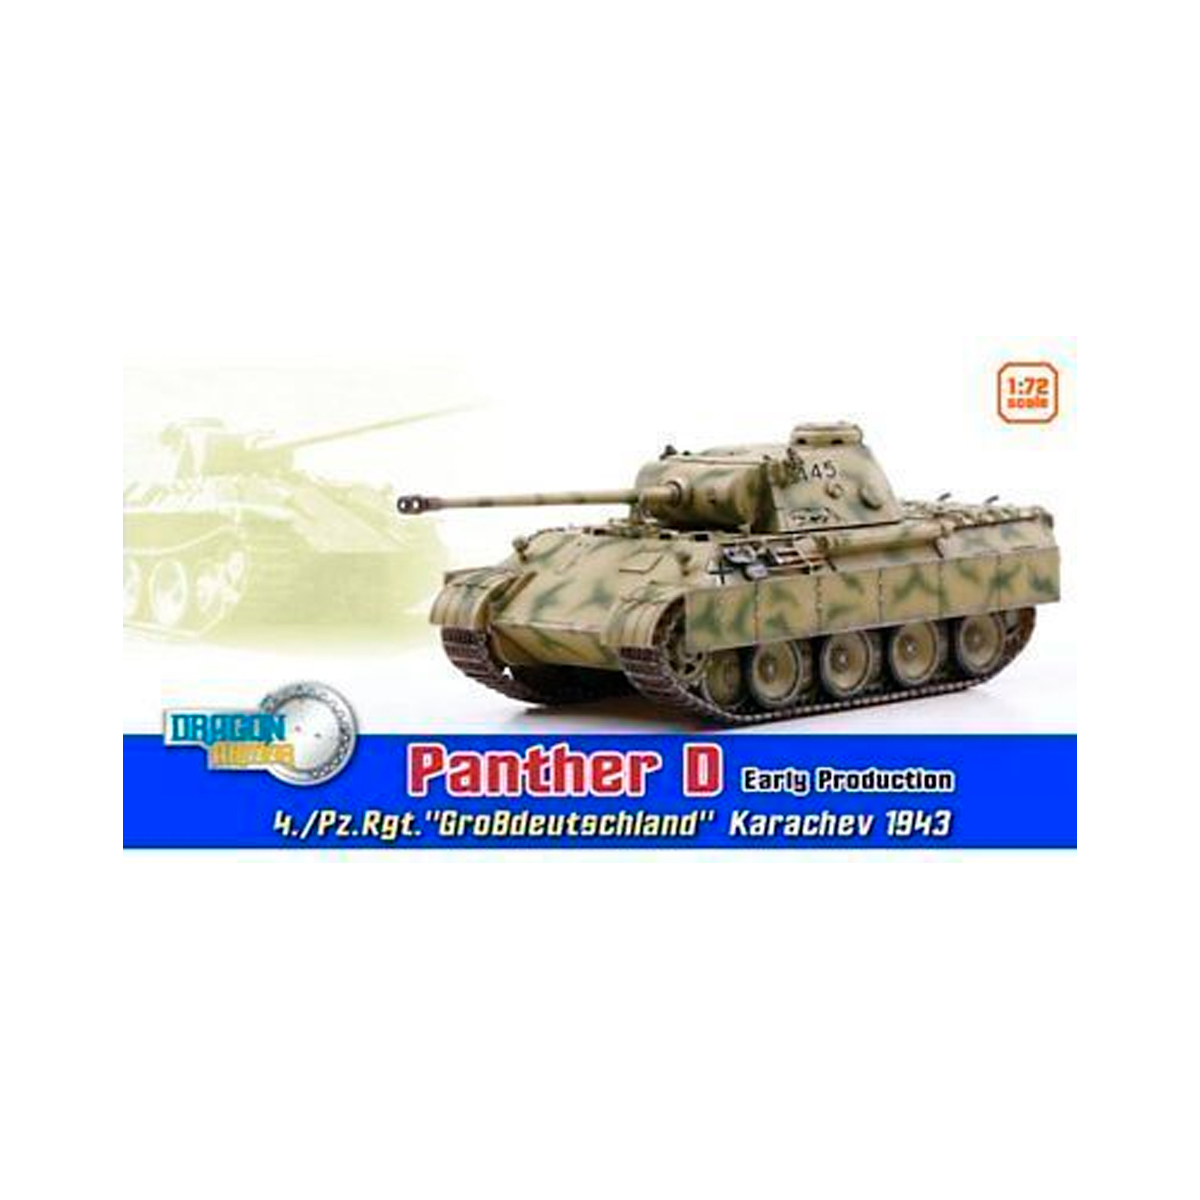 1:72 Panther Ausf.D Early Produc. 8./Pz.Rgt.39